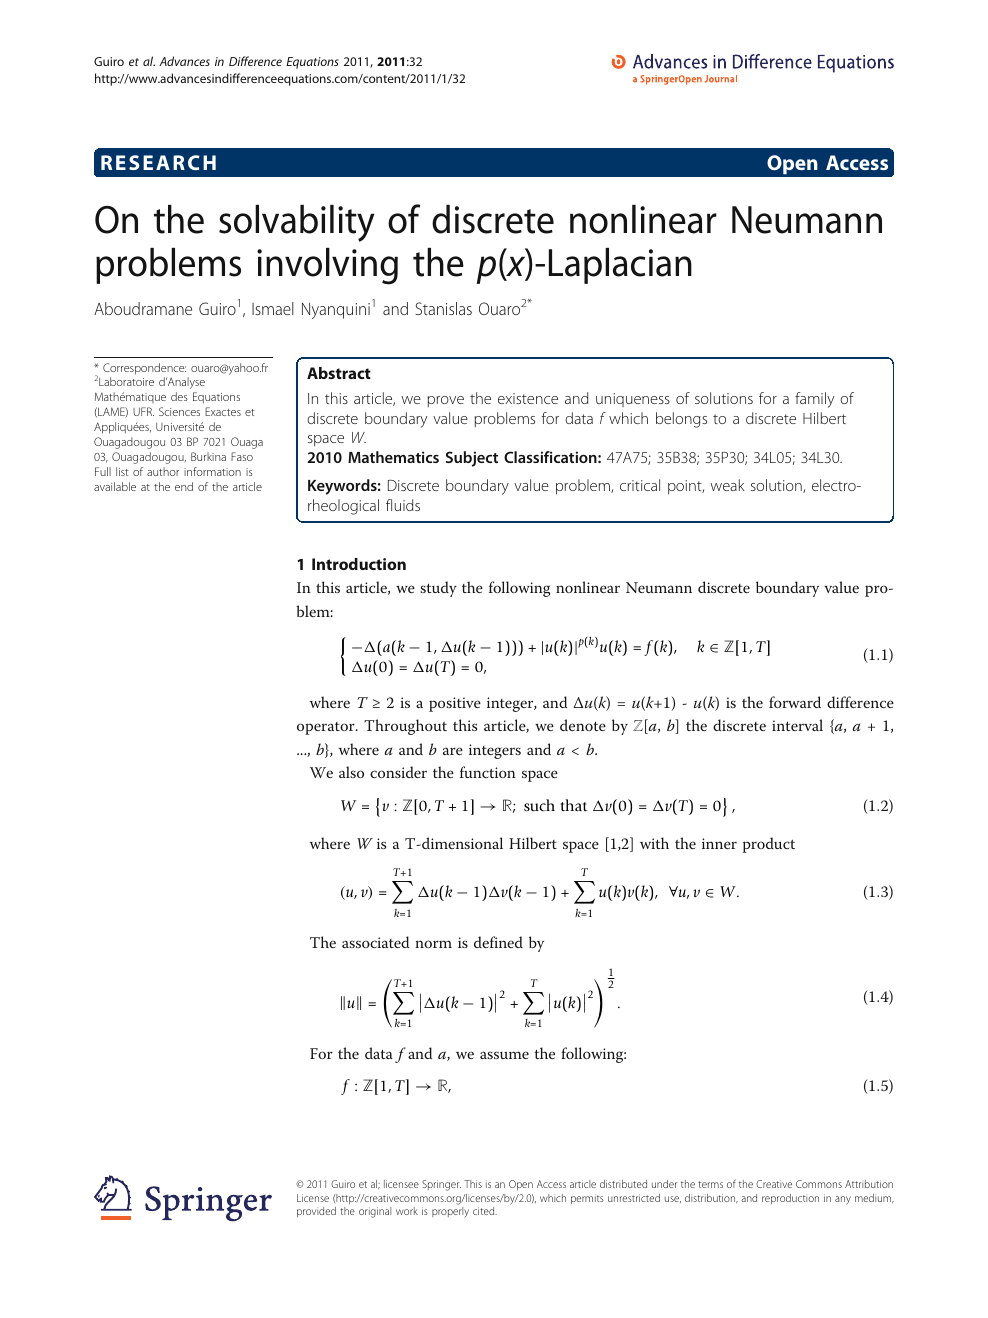 On The Solvability Of Discrete Nonlinear Neumann Problems Involving The P X Laplacian Topic Of Research Paper In Mathematics Download Scholarly Article Pdf And Read For Free On Cyberleninka Open Science Hub